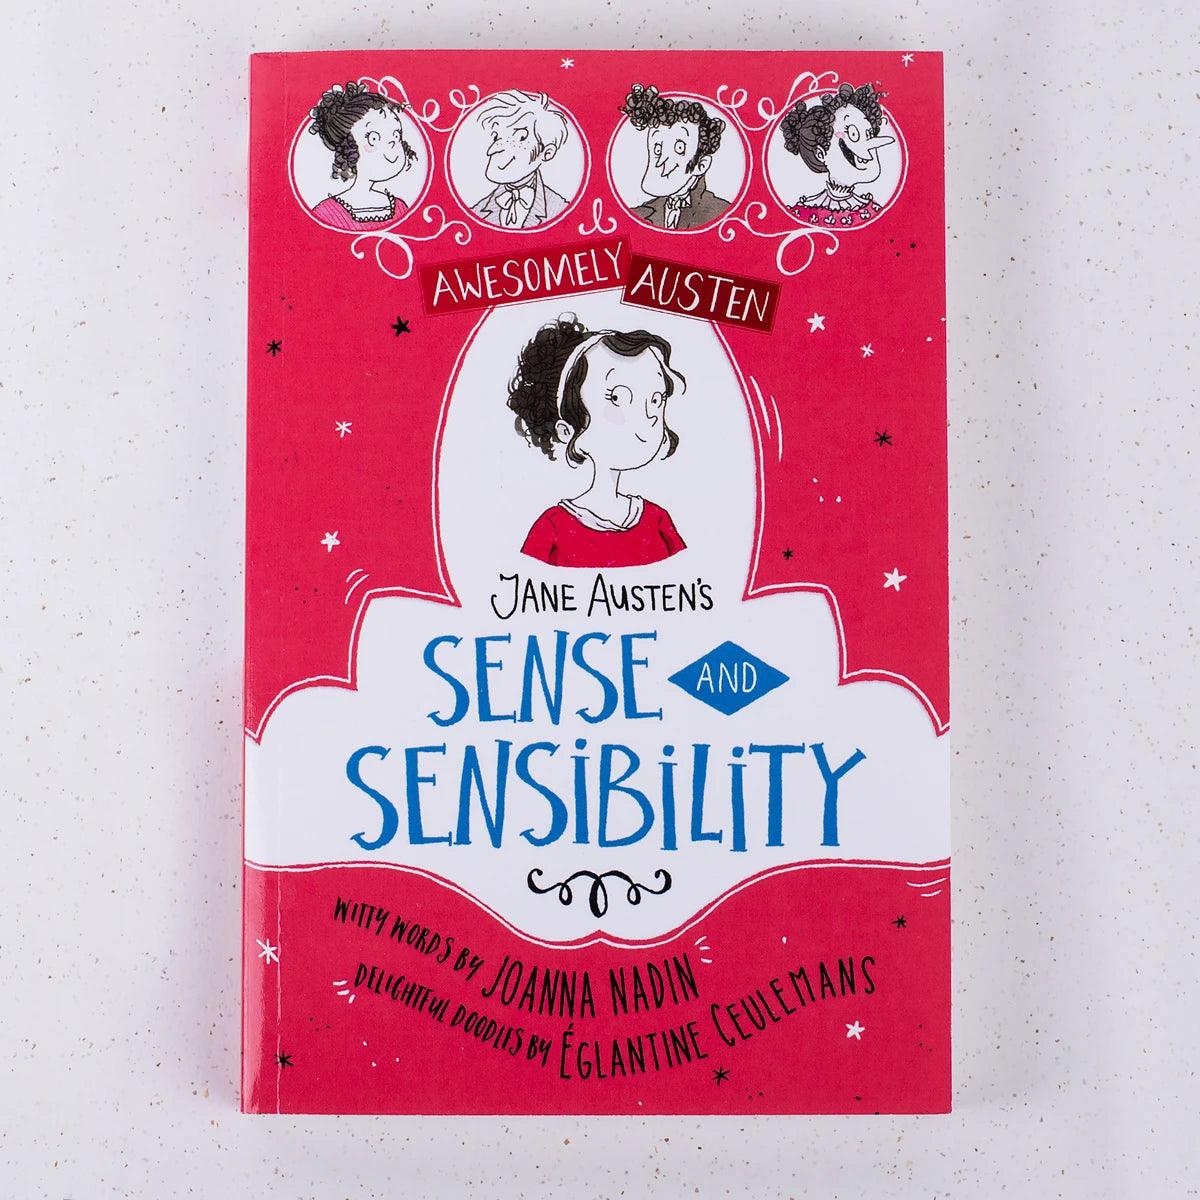 Jane Austen's Sense and Sensibility-Awesomely Austen Retold & Illustrated